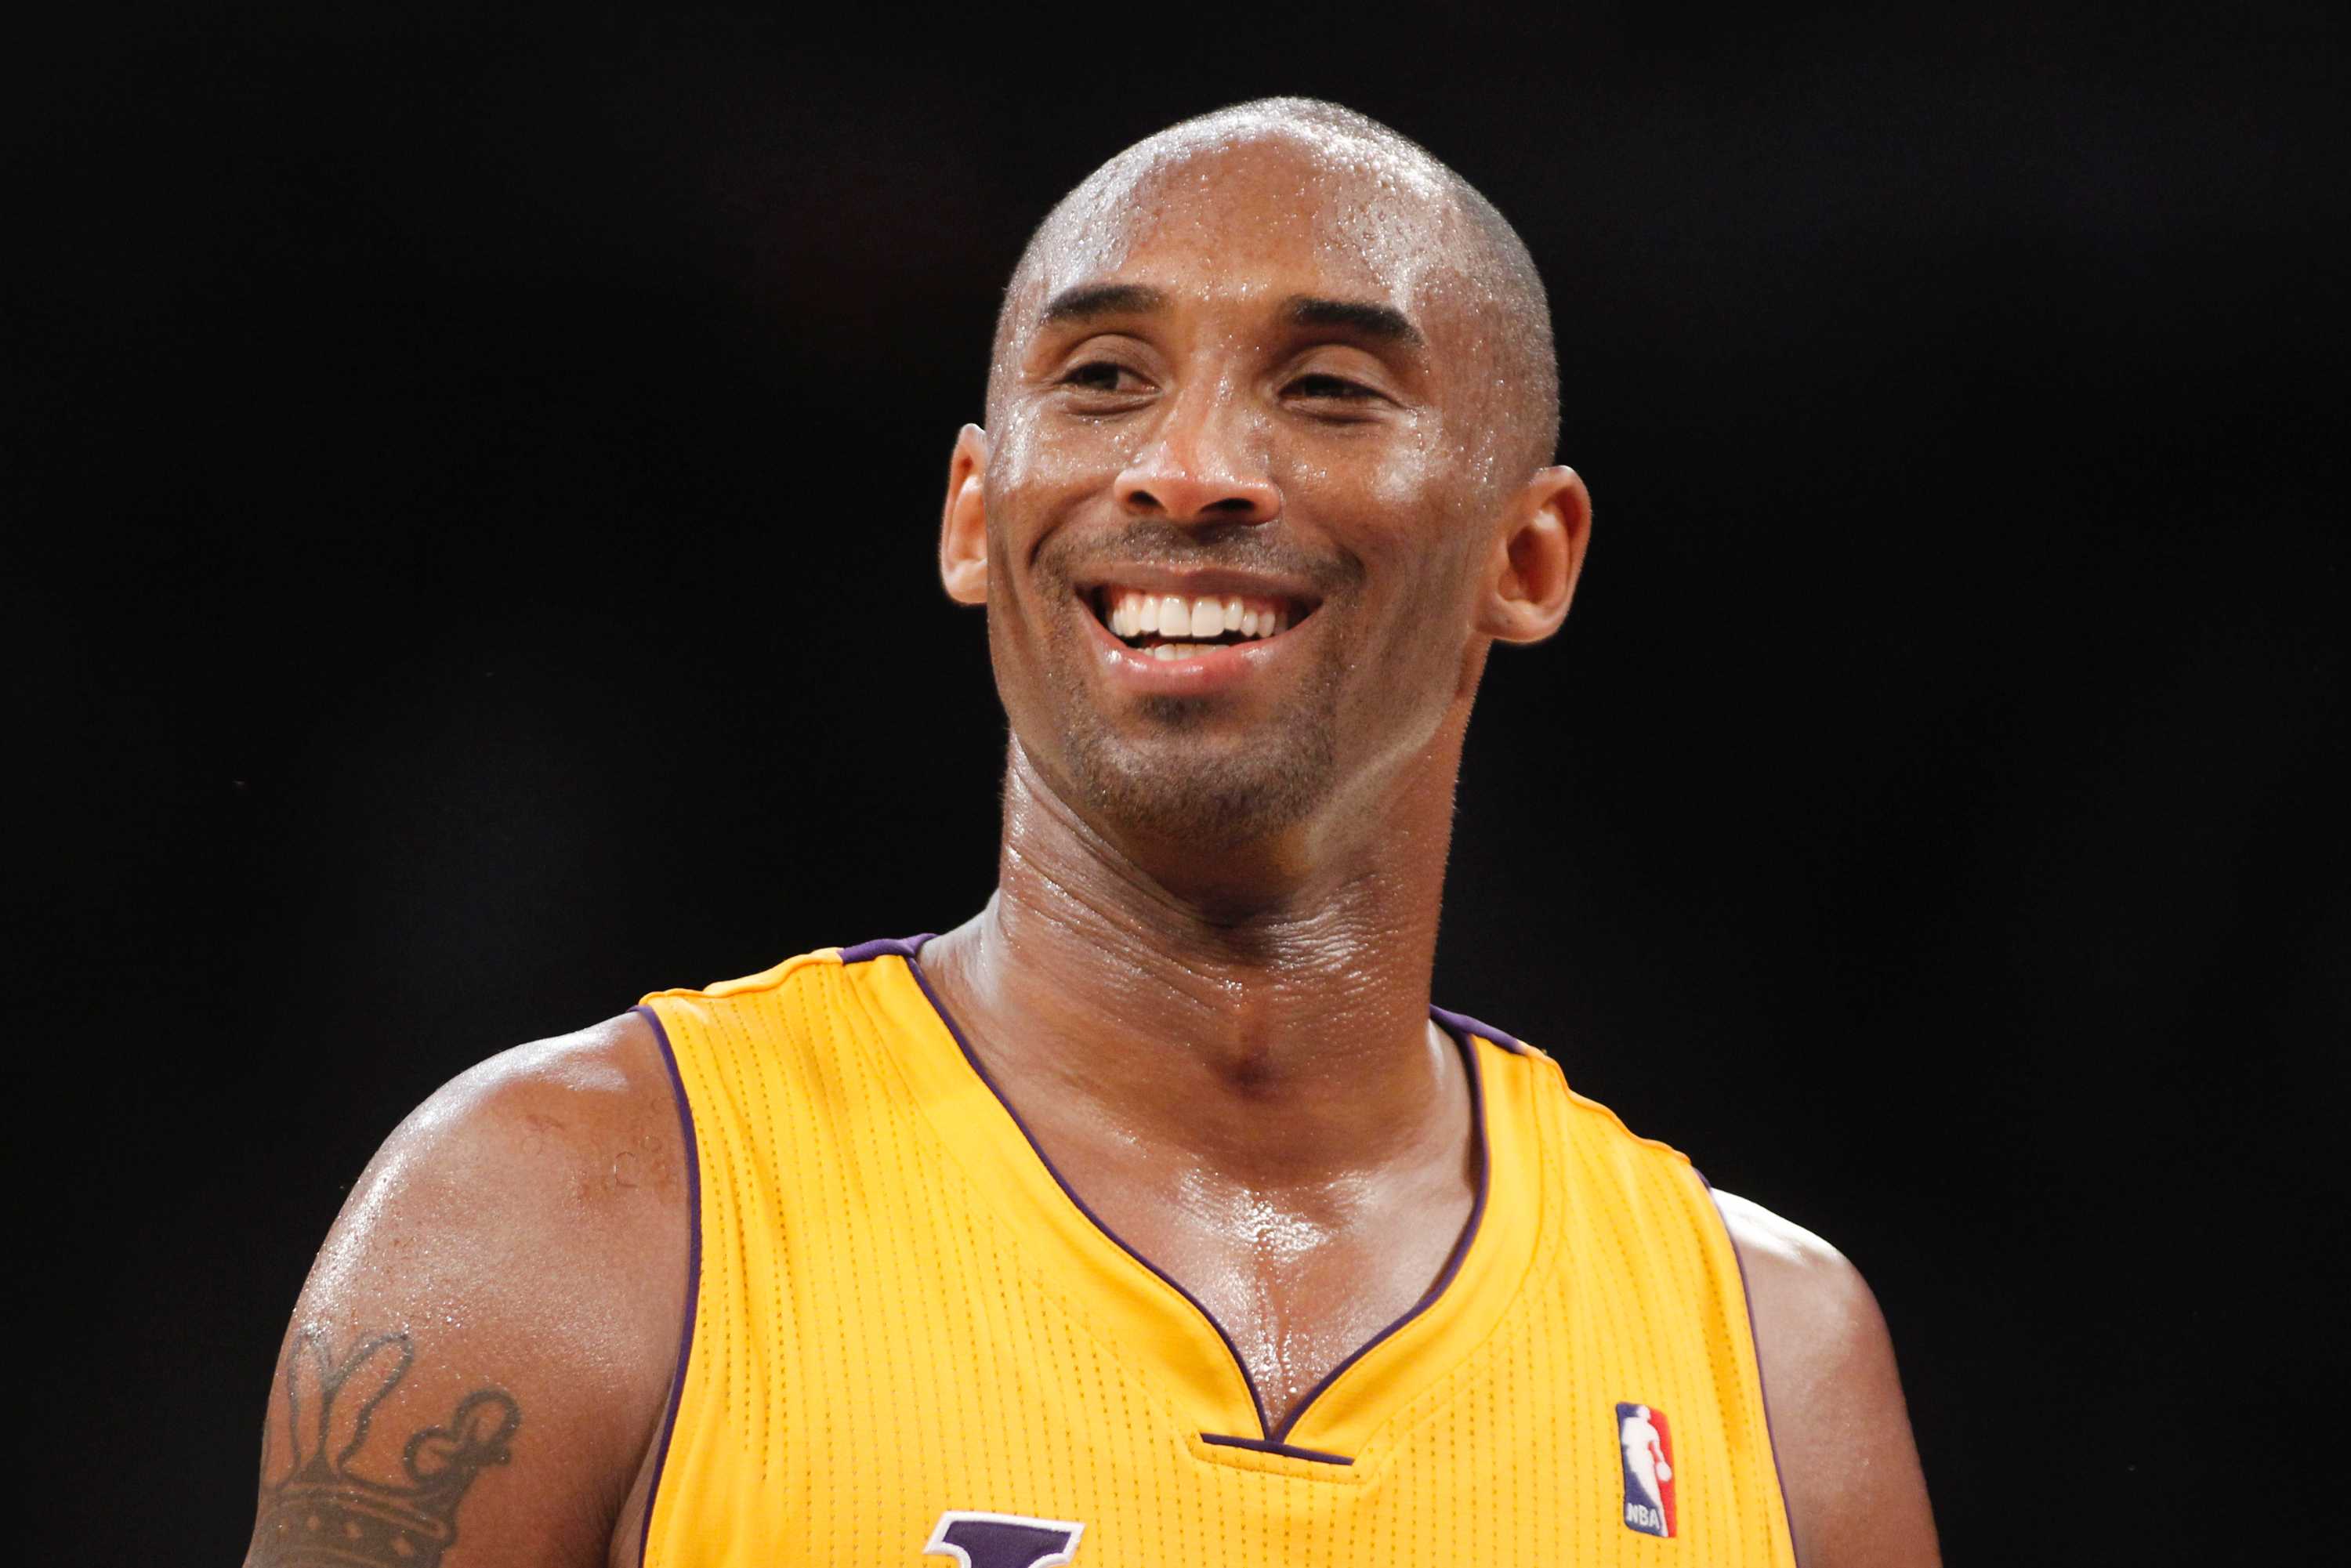 So sad to hear this news. Kobe Bryant was not only a legend on the